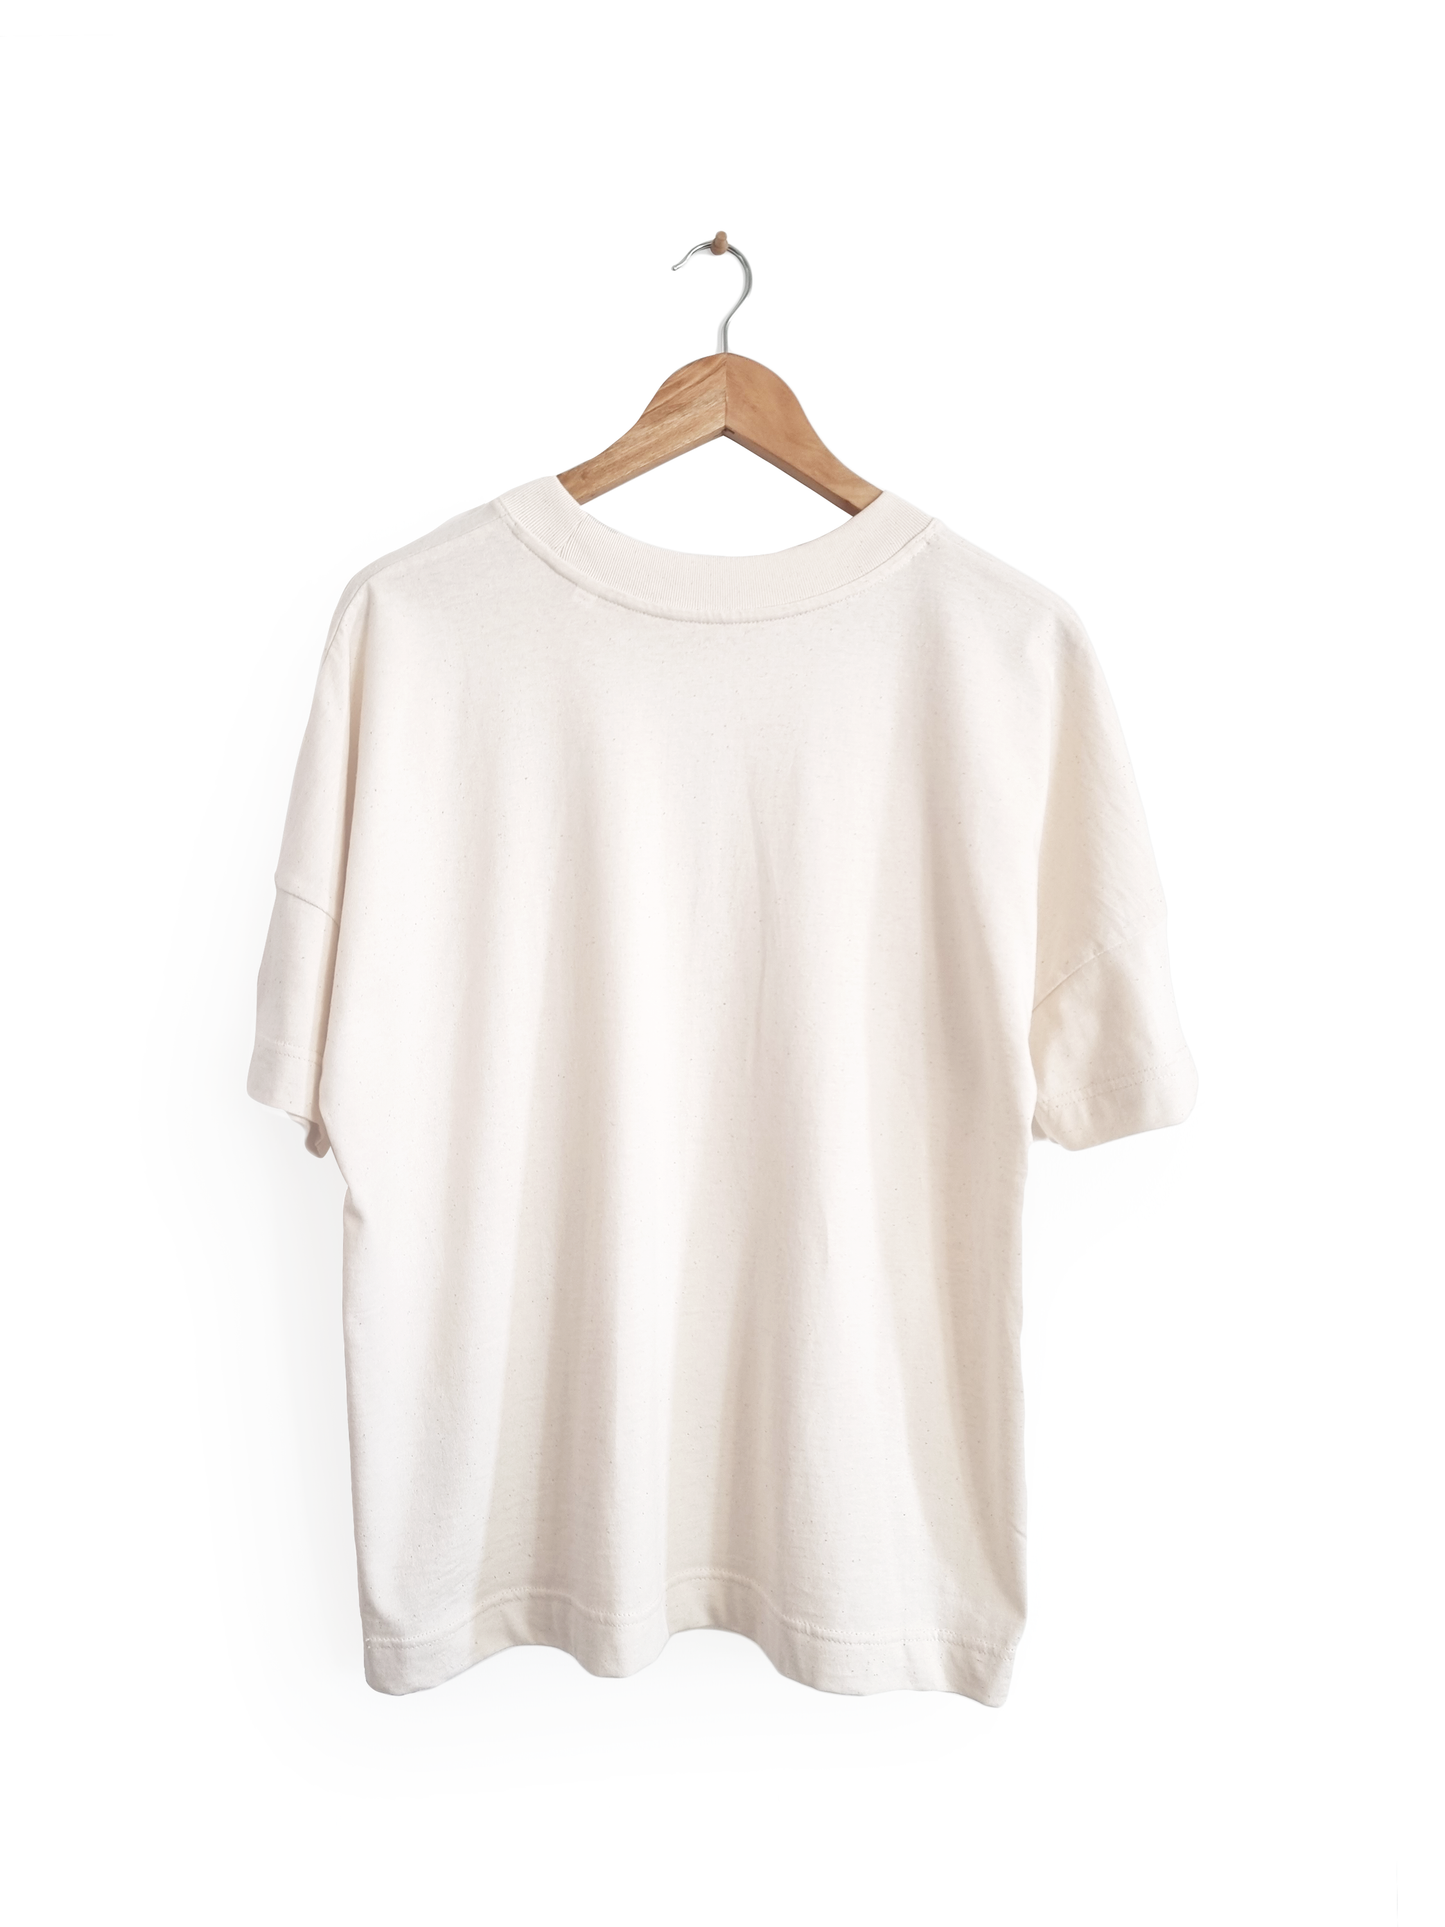 Ethical and sustainable, natural raw organic cotton tee / t shirt with embroidered prana design for yoga, gym, or lounge.